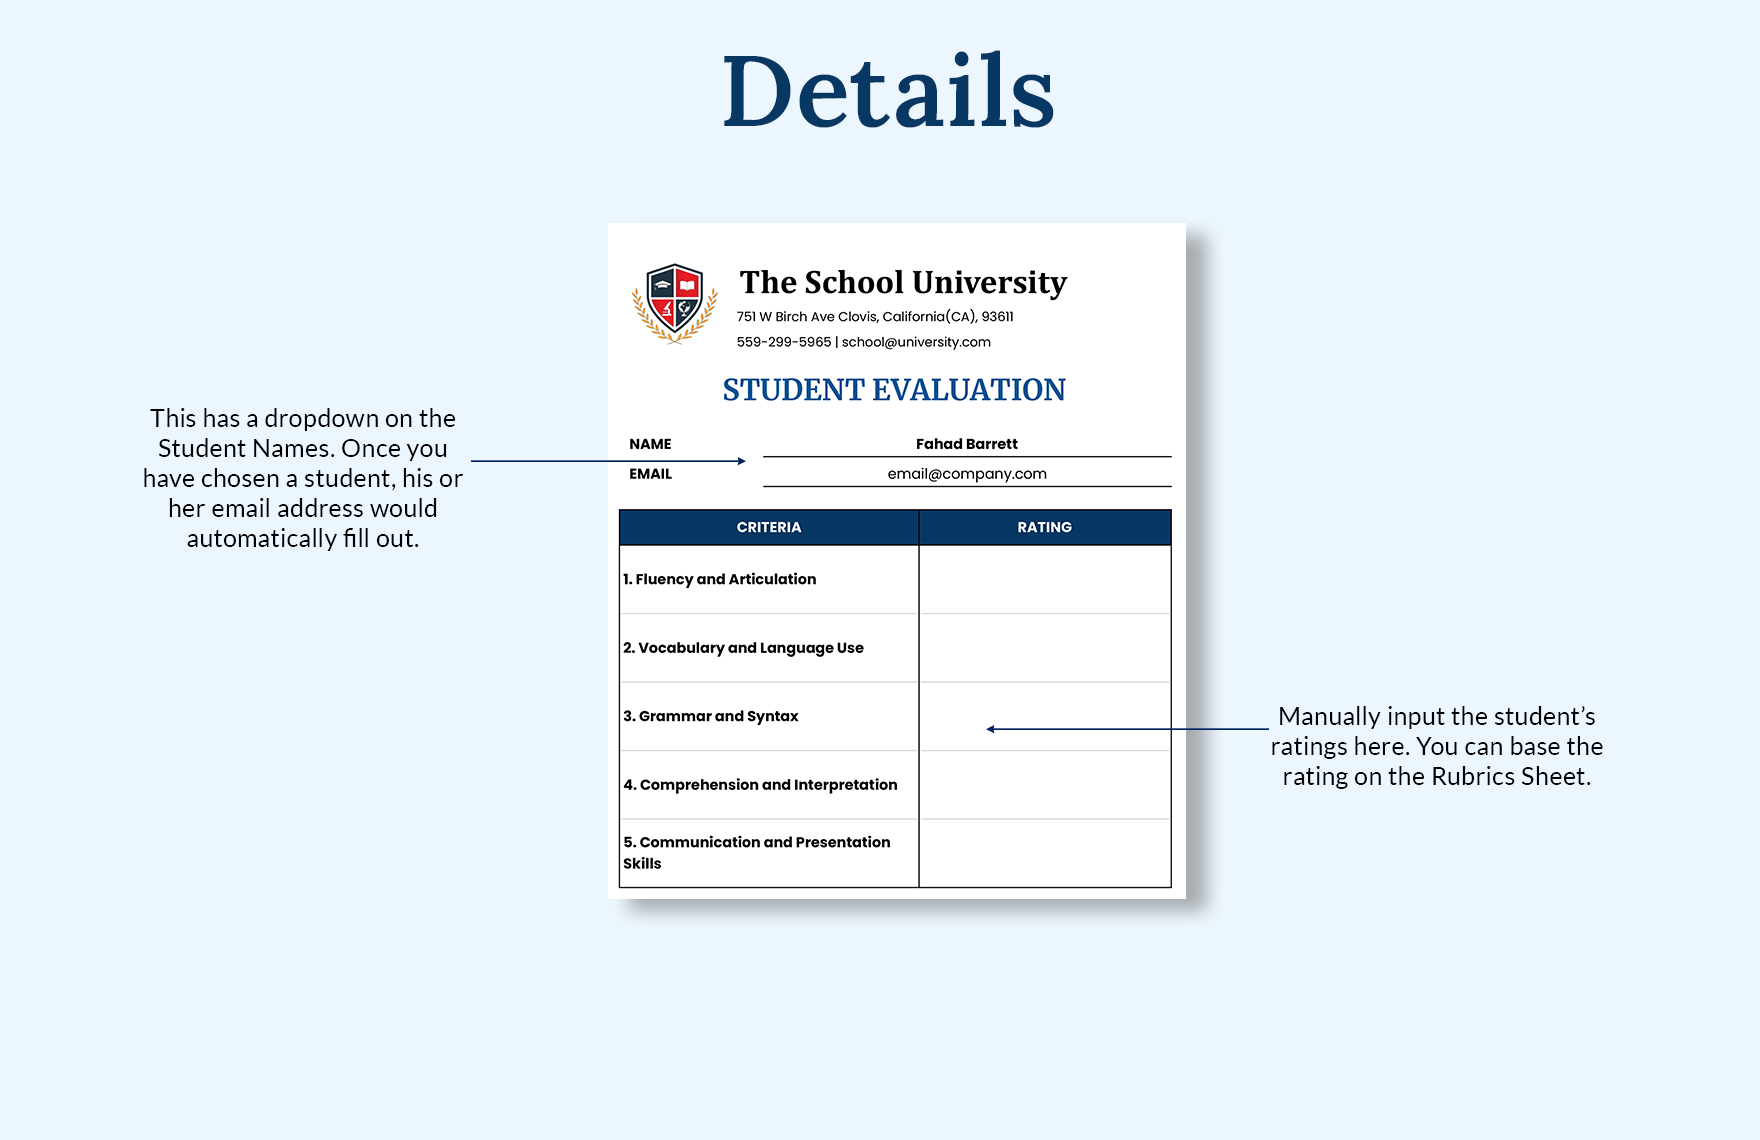 Student Evaluation Rubric Template